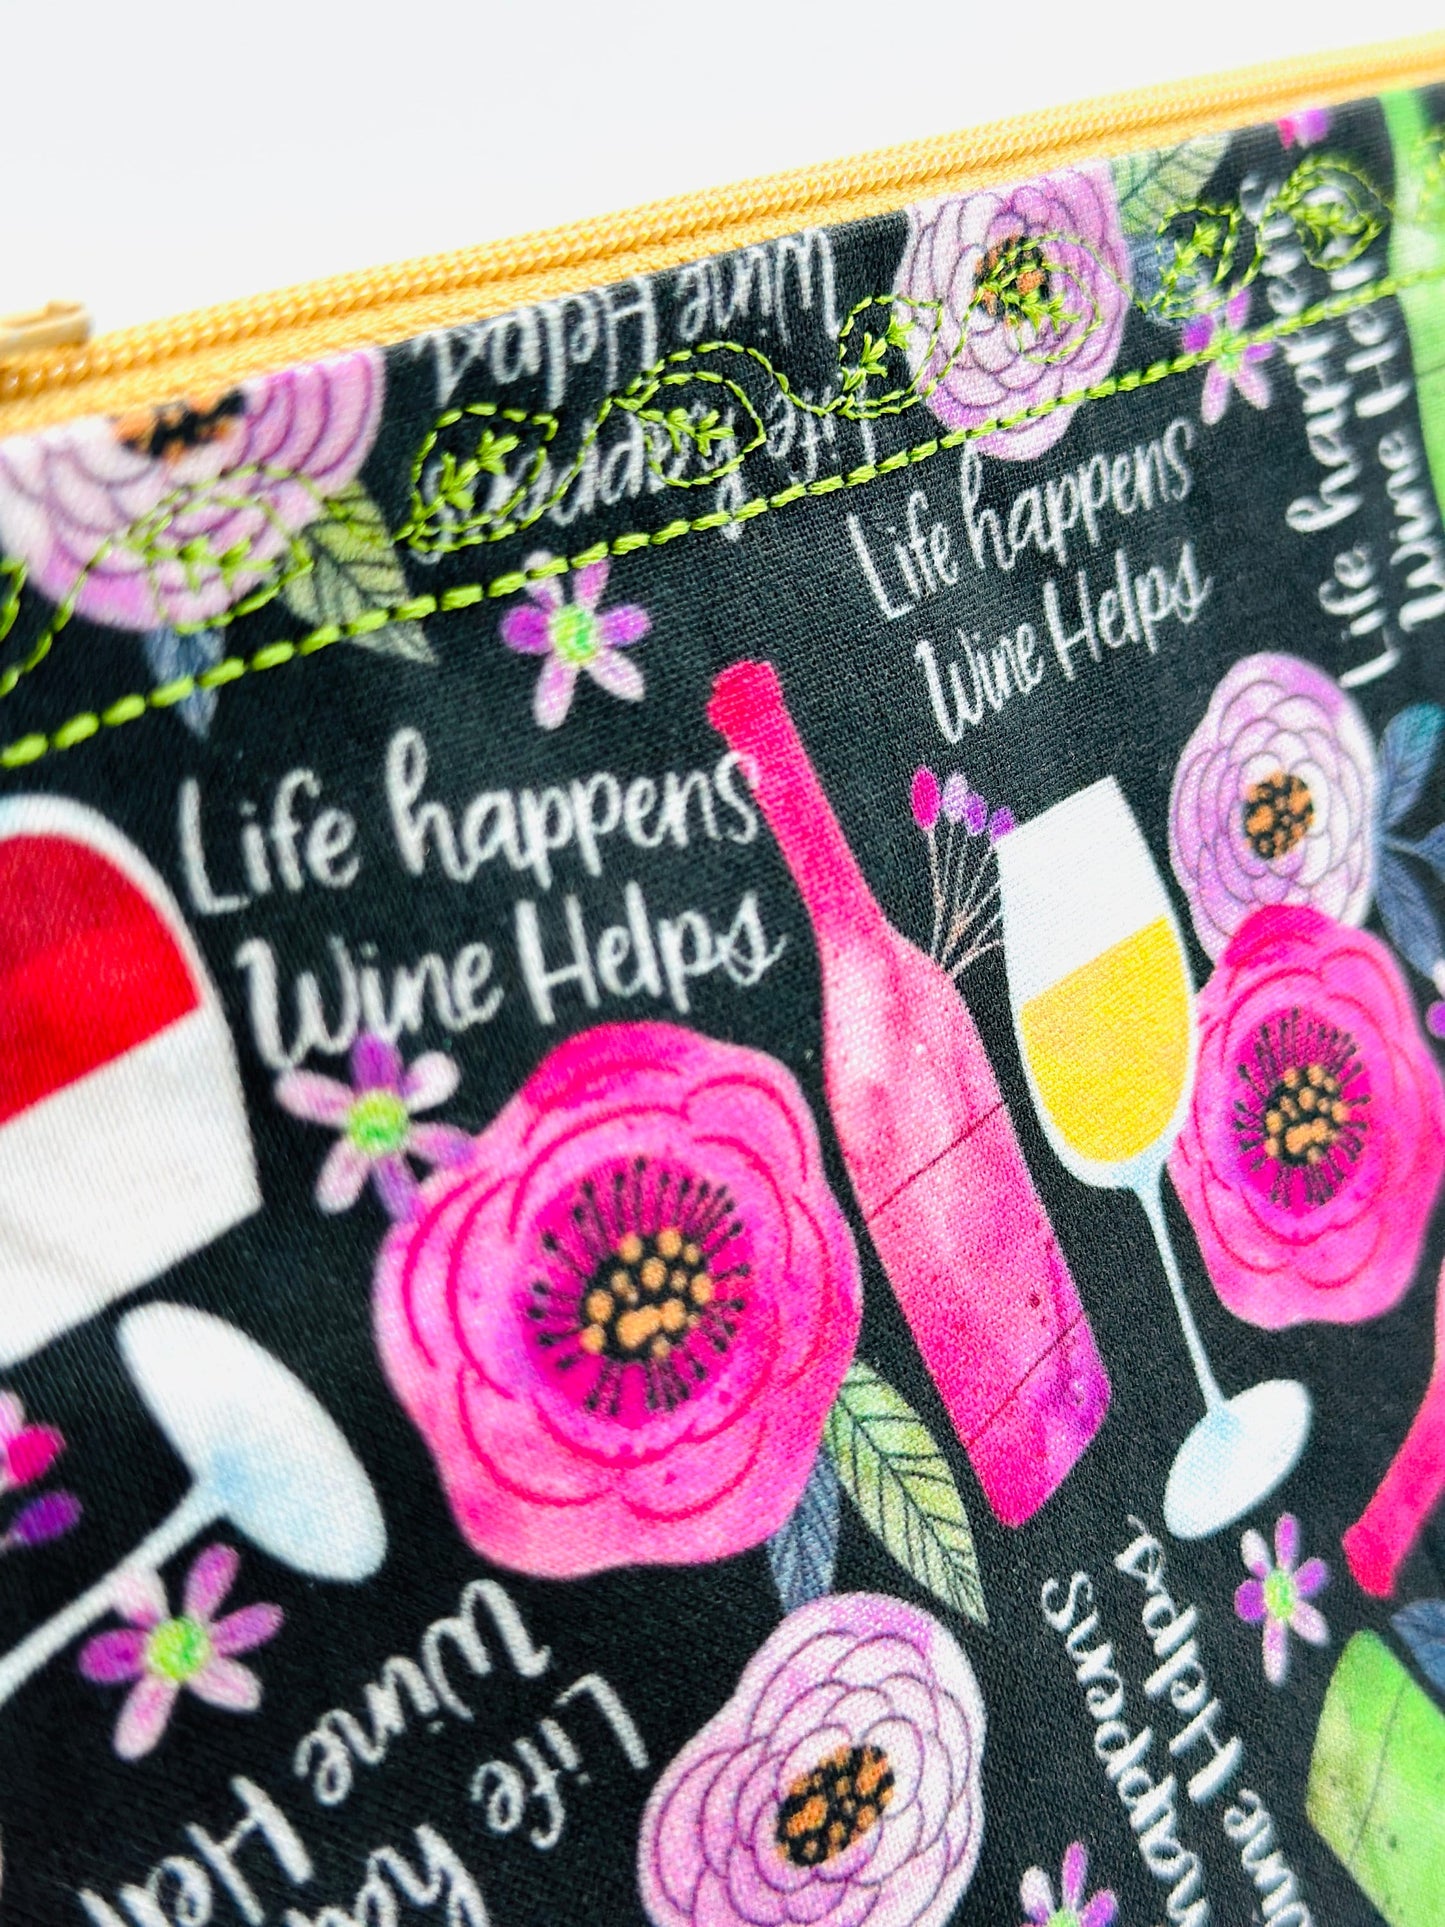 Large project bag - Life happens wine helps